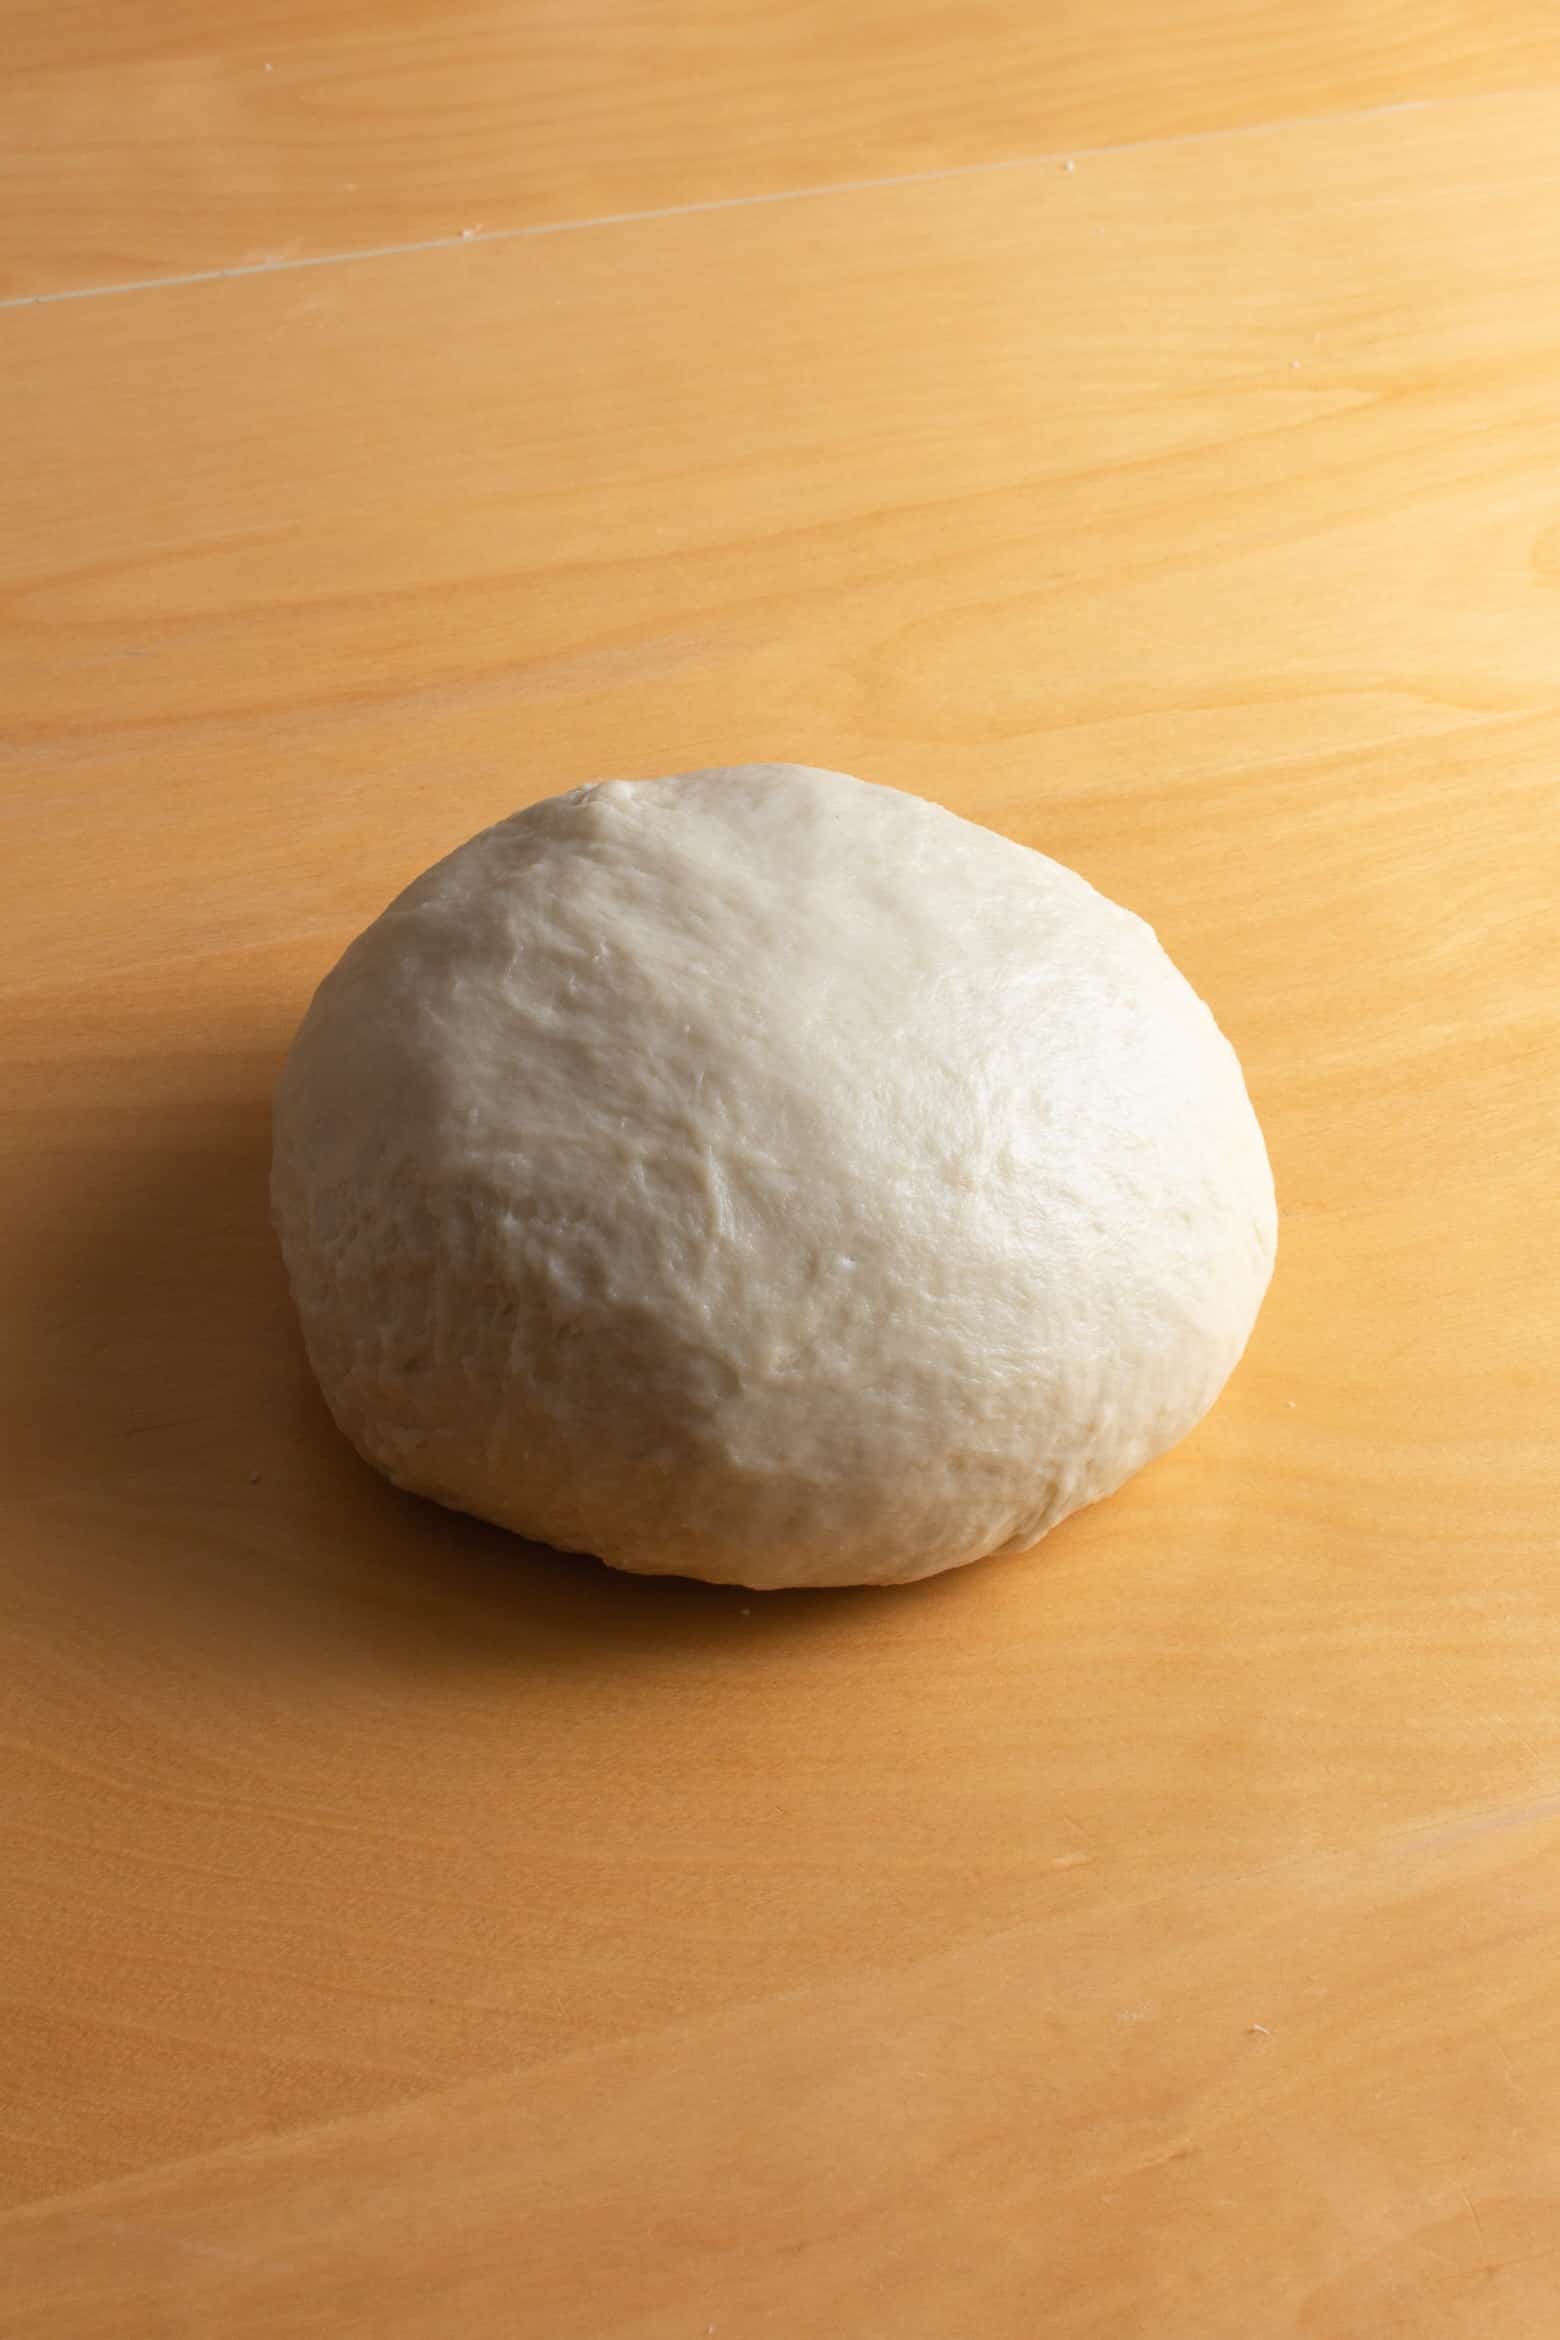 Kneaded ball of bread dough on a wooden surface.